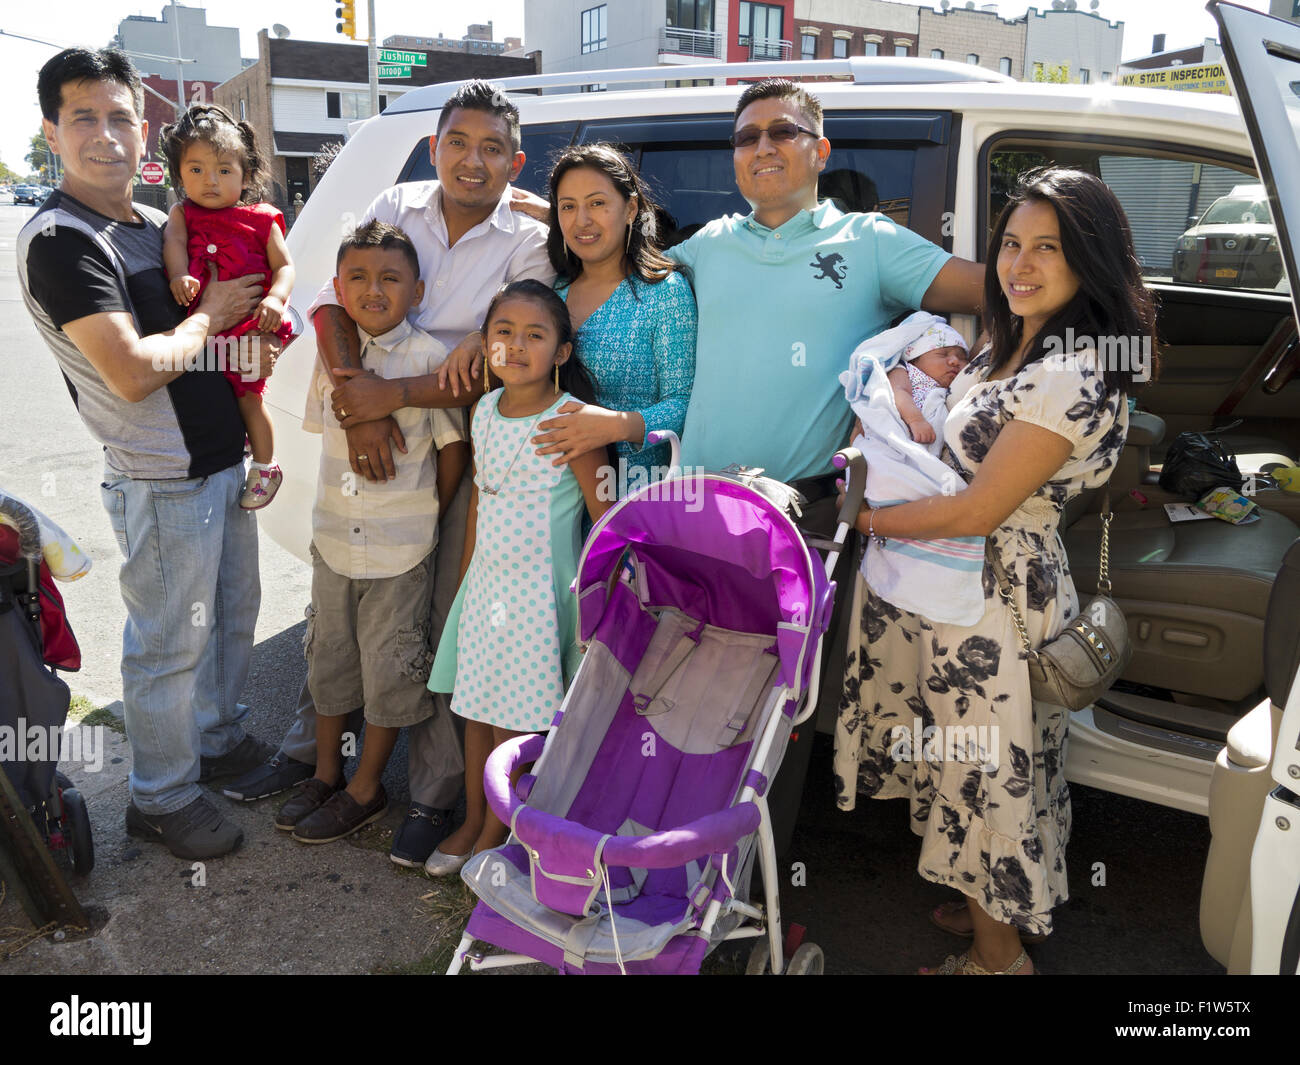 Ecuadorian families outside after church service in the Williamsburg section of Brooklyn, New York. Stock Photo